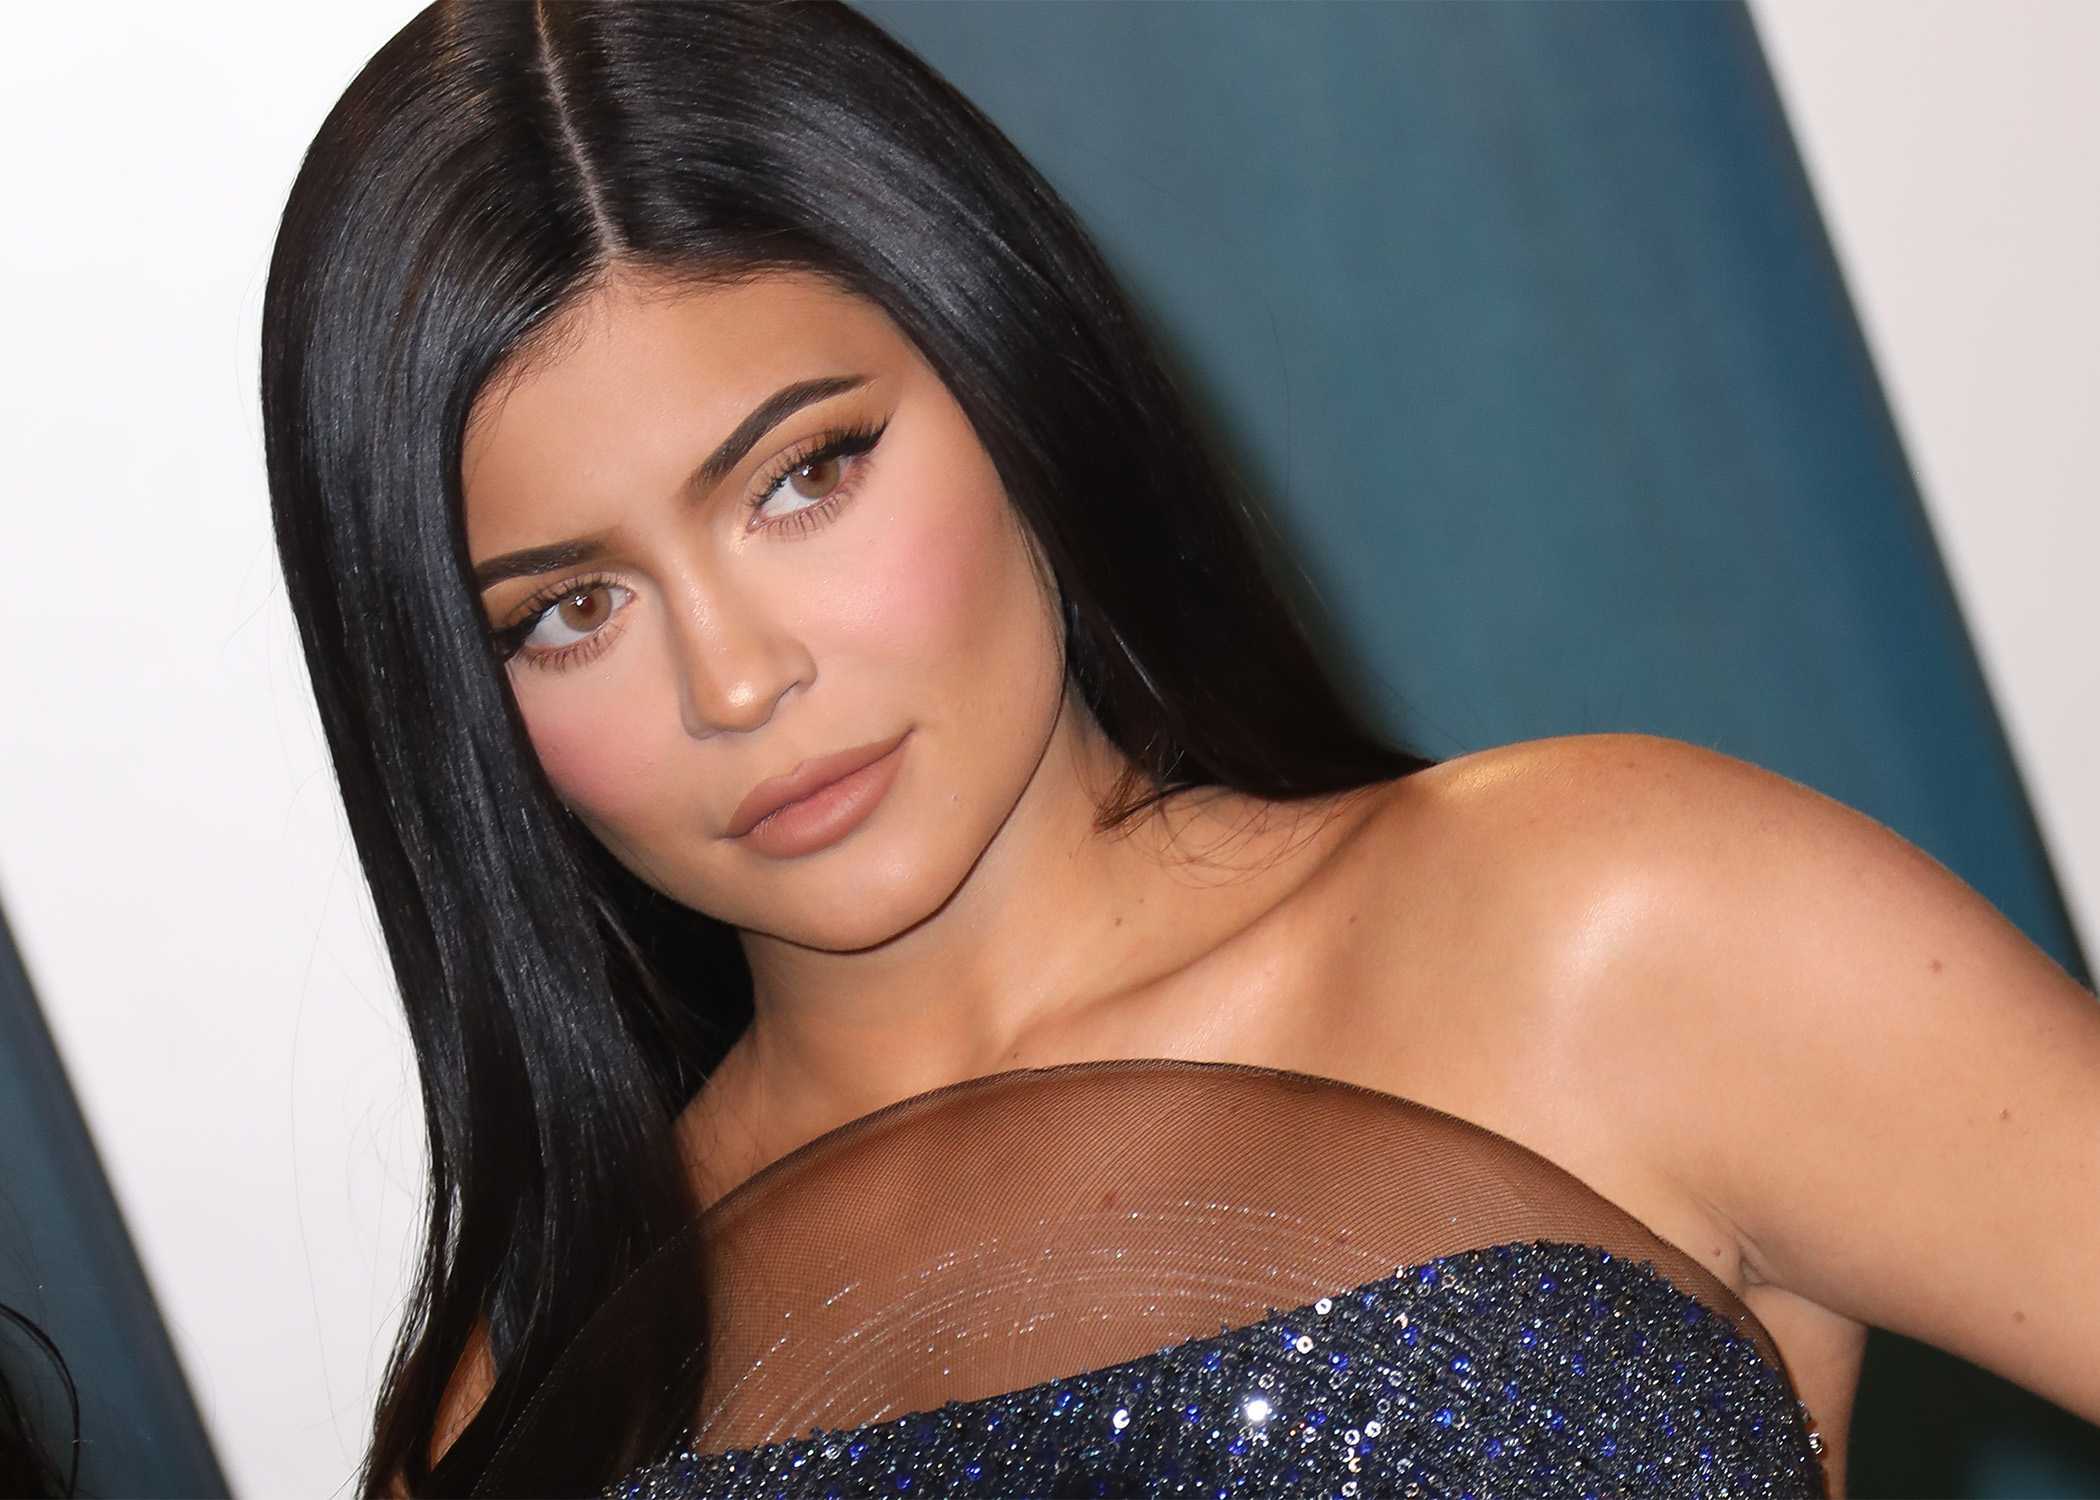 Kylie Jenner's Latest Selfie Sparks Outrage: Fans Question If She's Still Human!